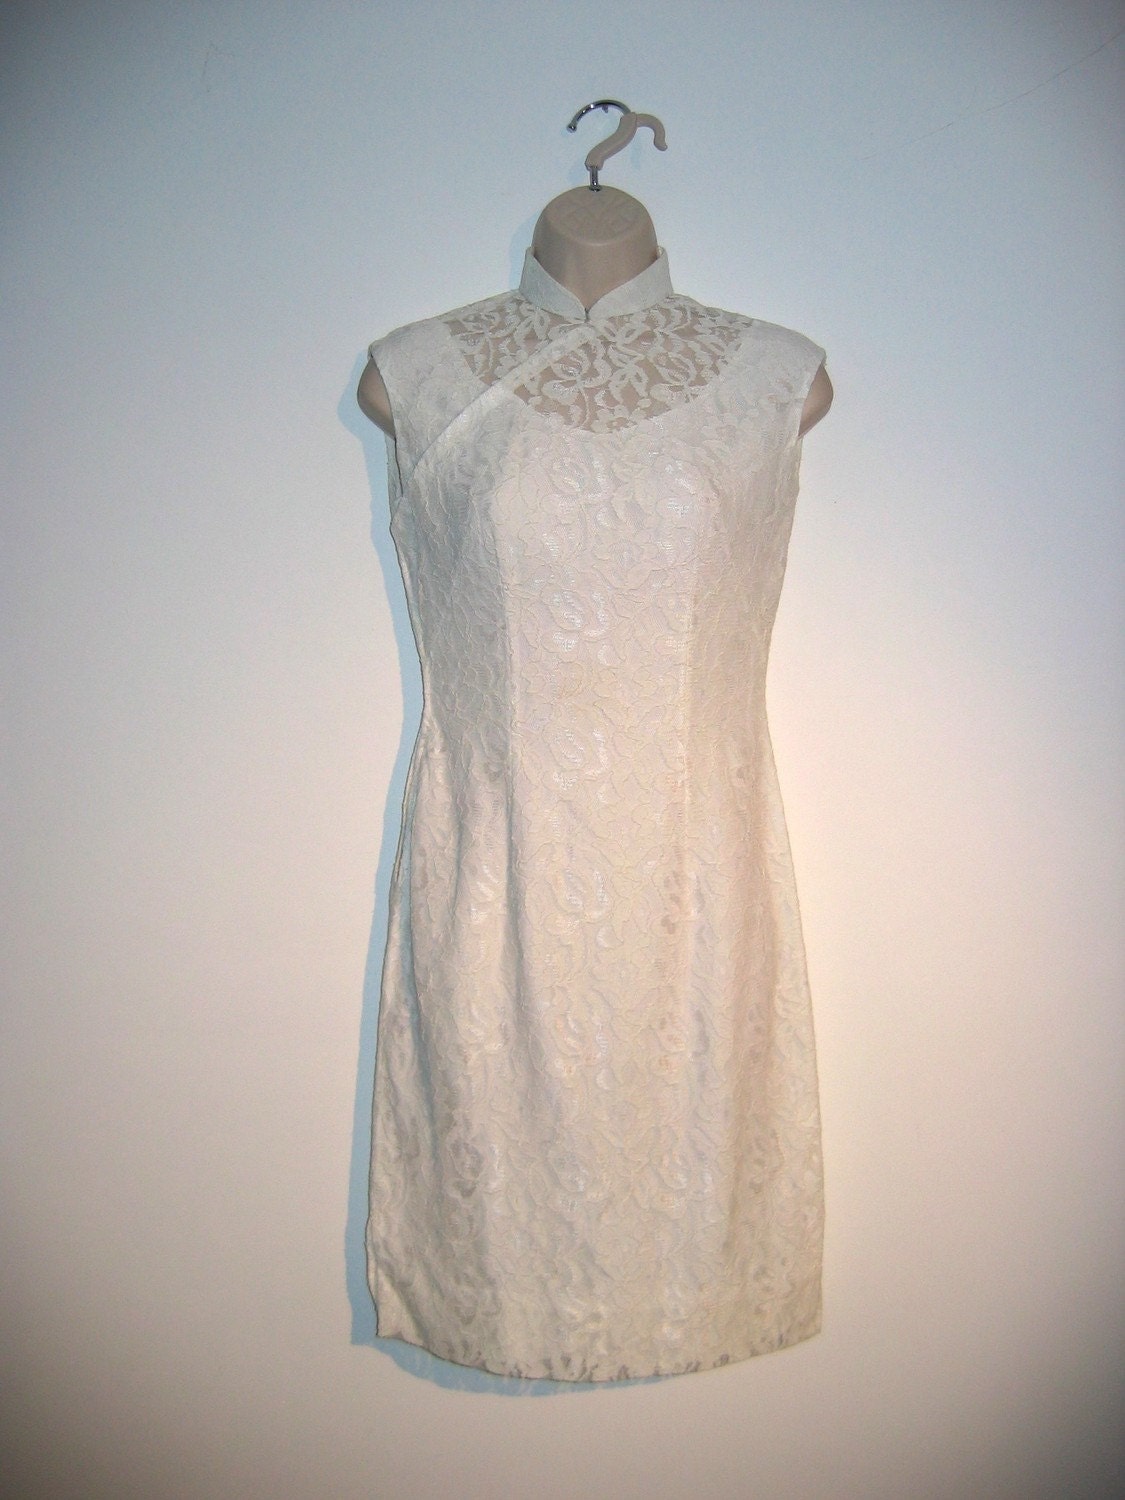 Vintage 1950's Chinese style Dress.  White lace.  Pin up Glamour. Small size